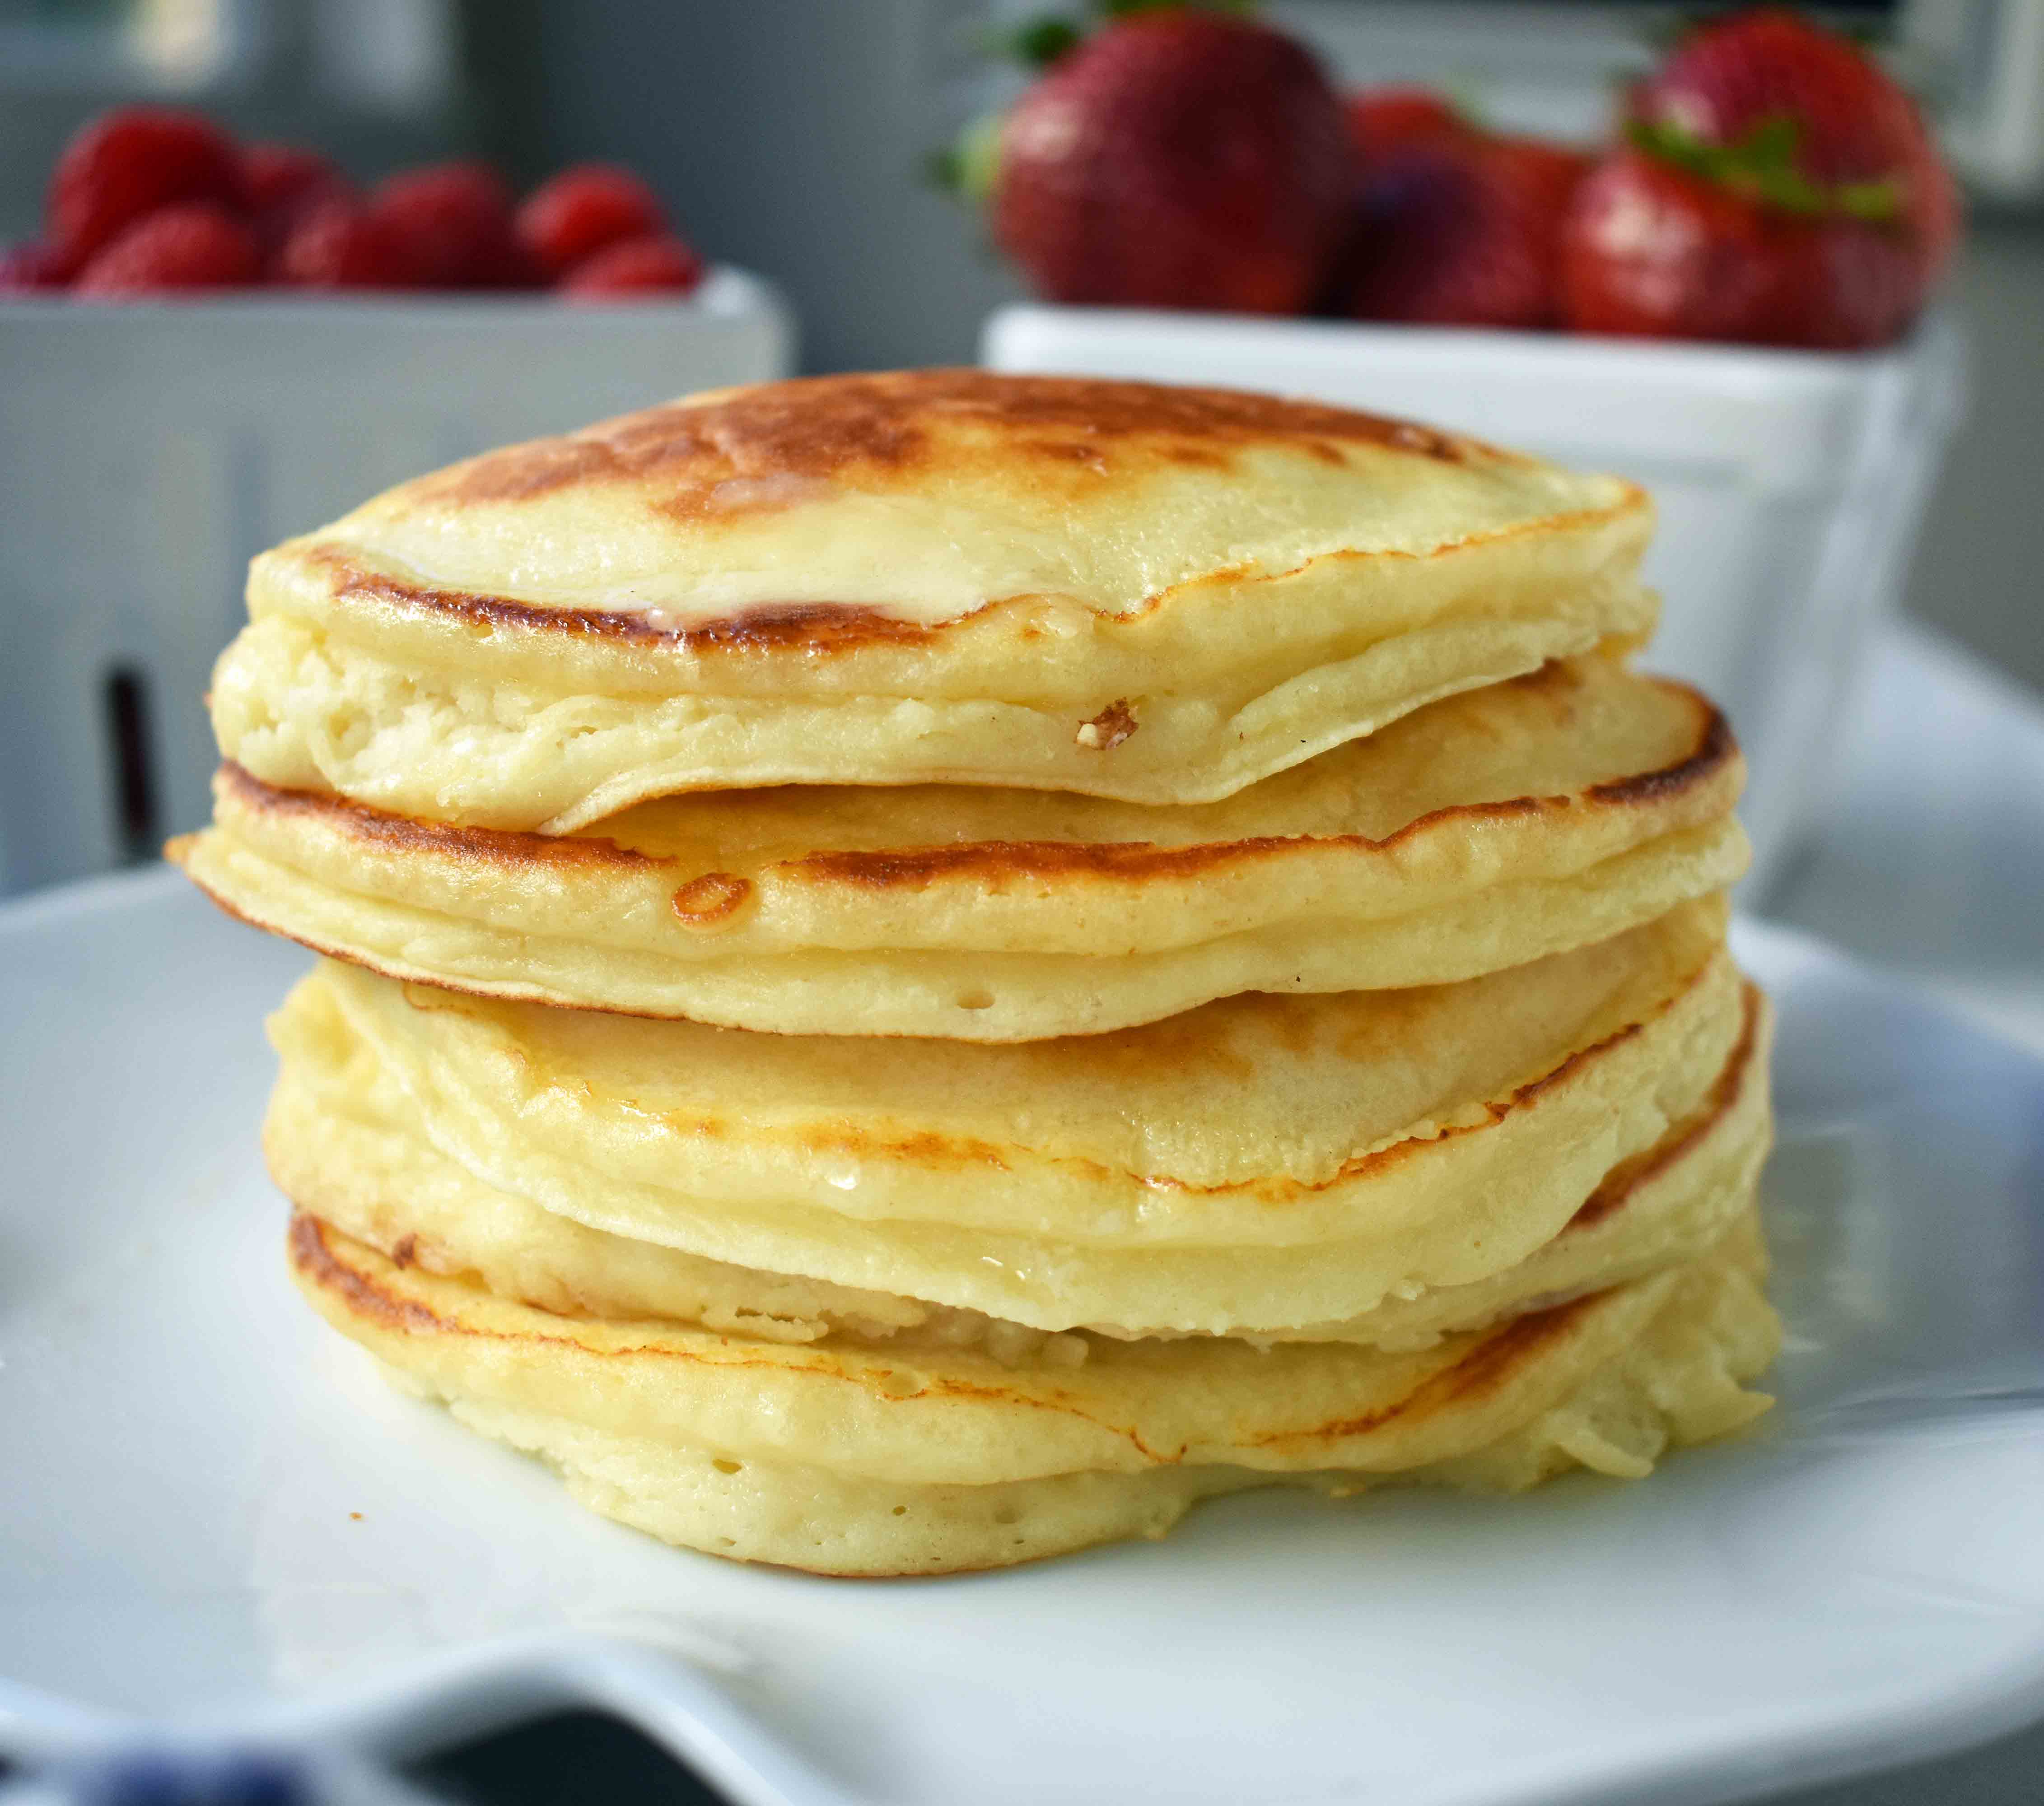 Sweet Cream Ricotta Pancakes. One bowl pancakes made in less than 5 minutes. Ricotta pancakes are a hybrid between a pancake and a crepe. Creamy, sweet pancakes that melt in your mouth. Some say these ricotta pancakes are the best out there. You be the judge! www.modernhoney.com